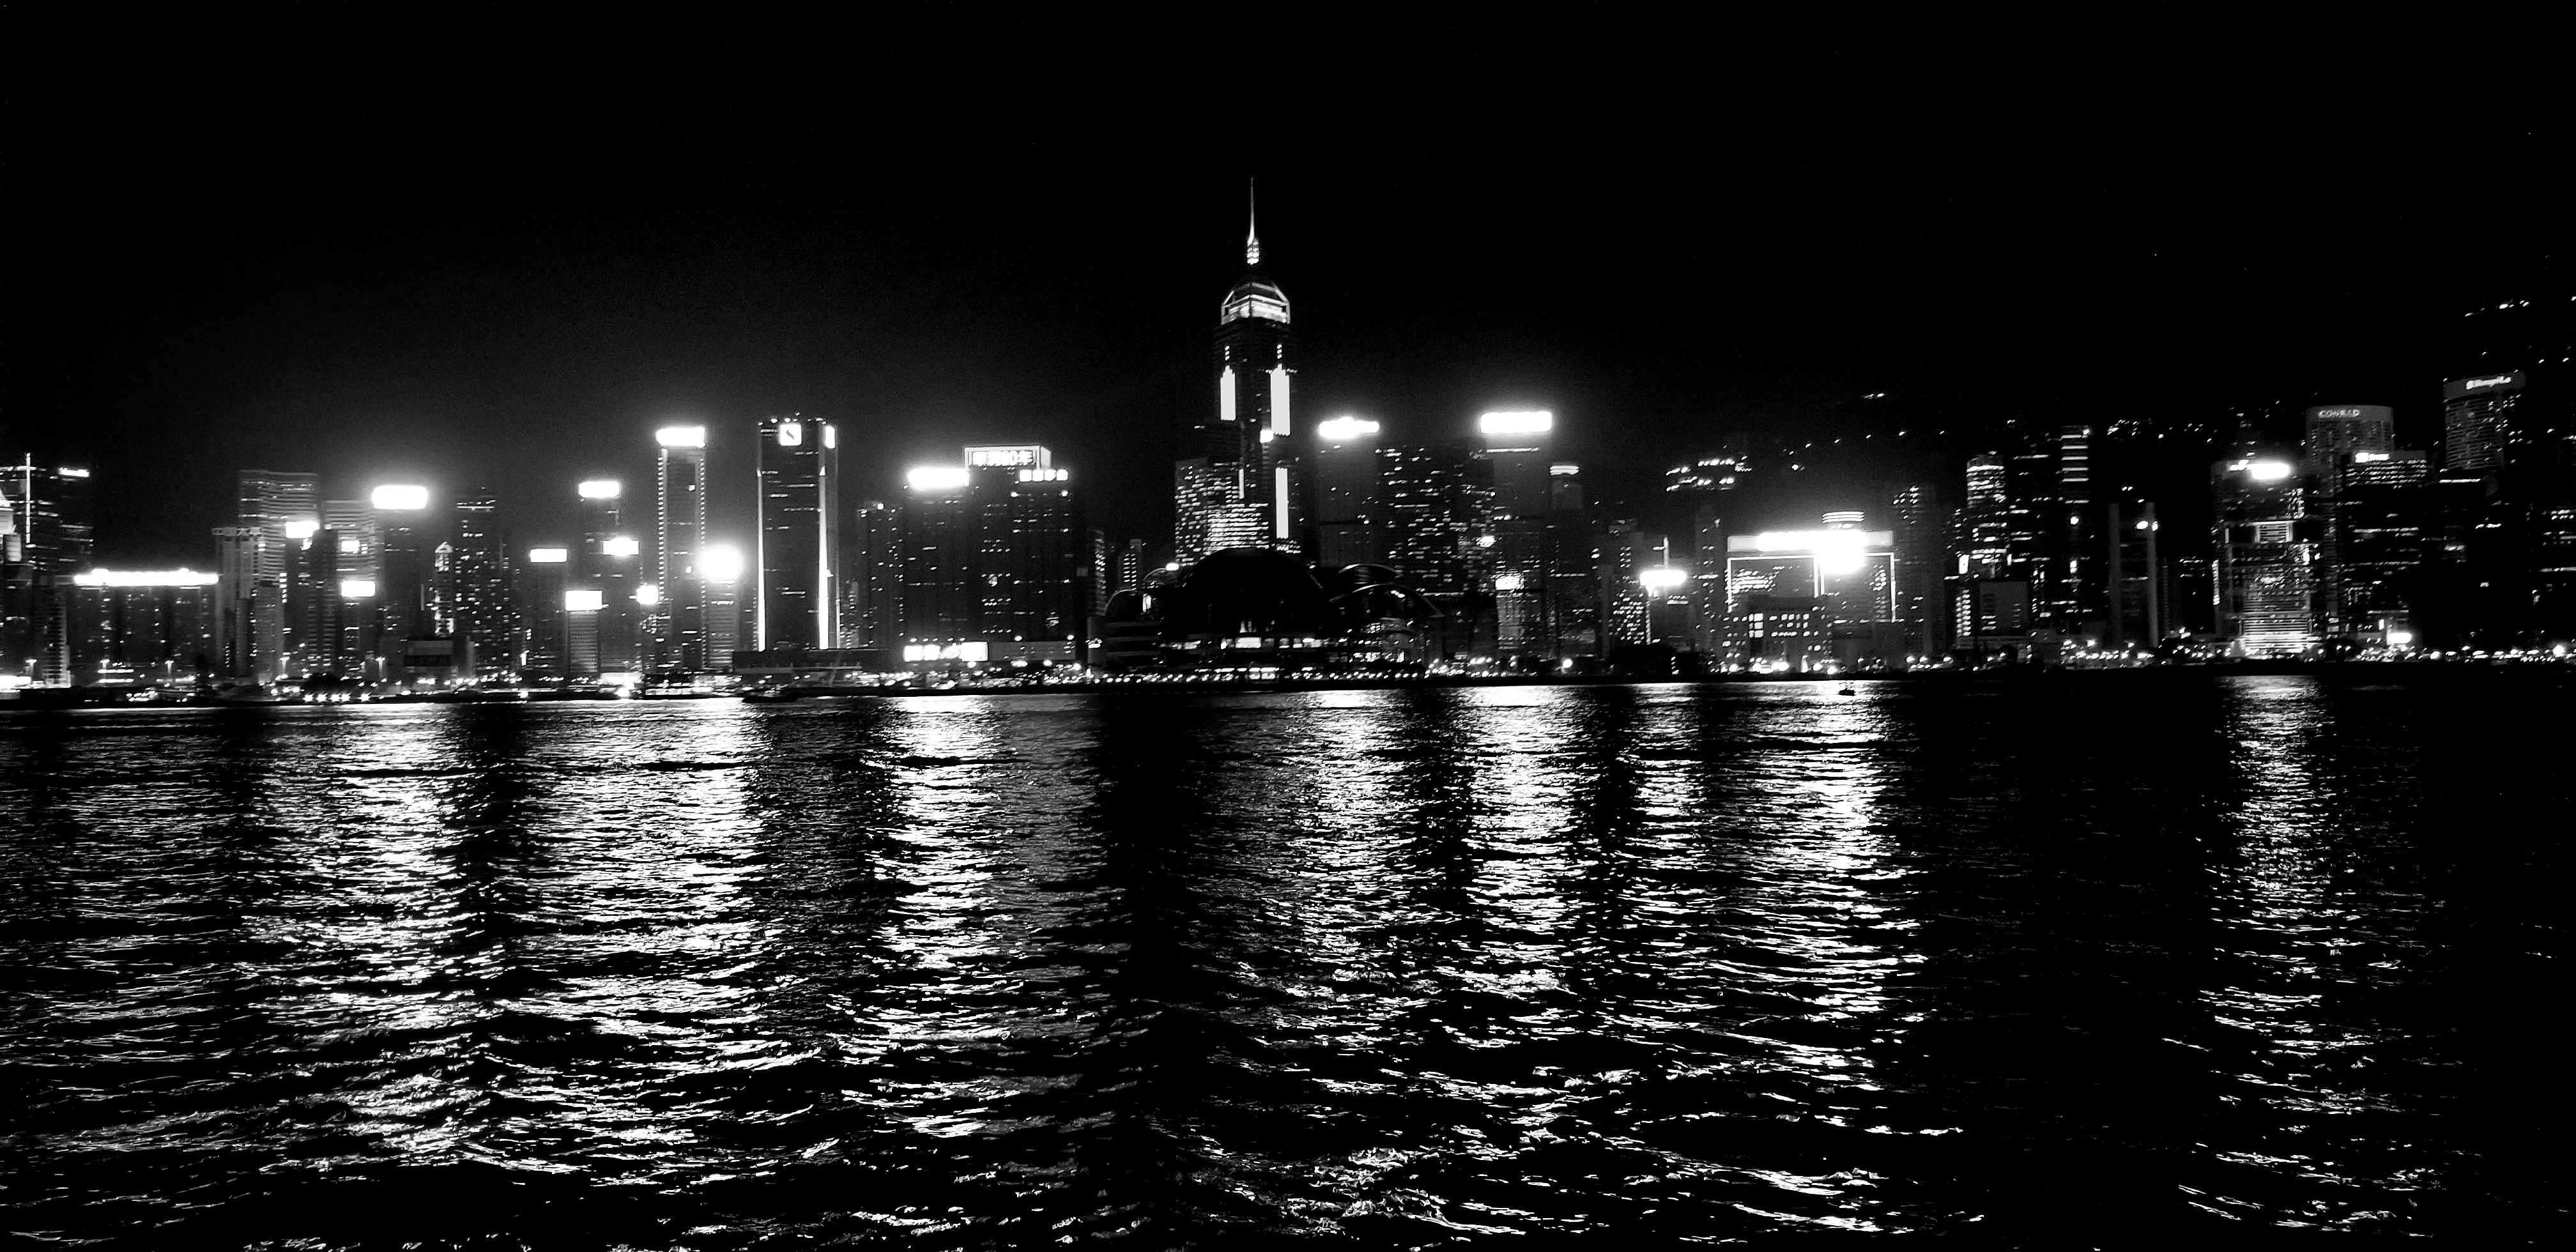 Black and white photo of a city at night, taken from on the water. 